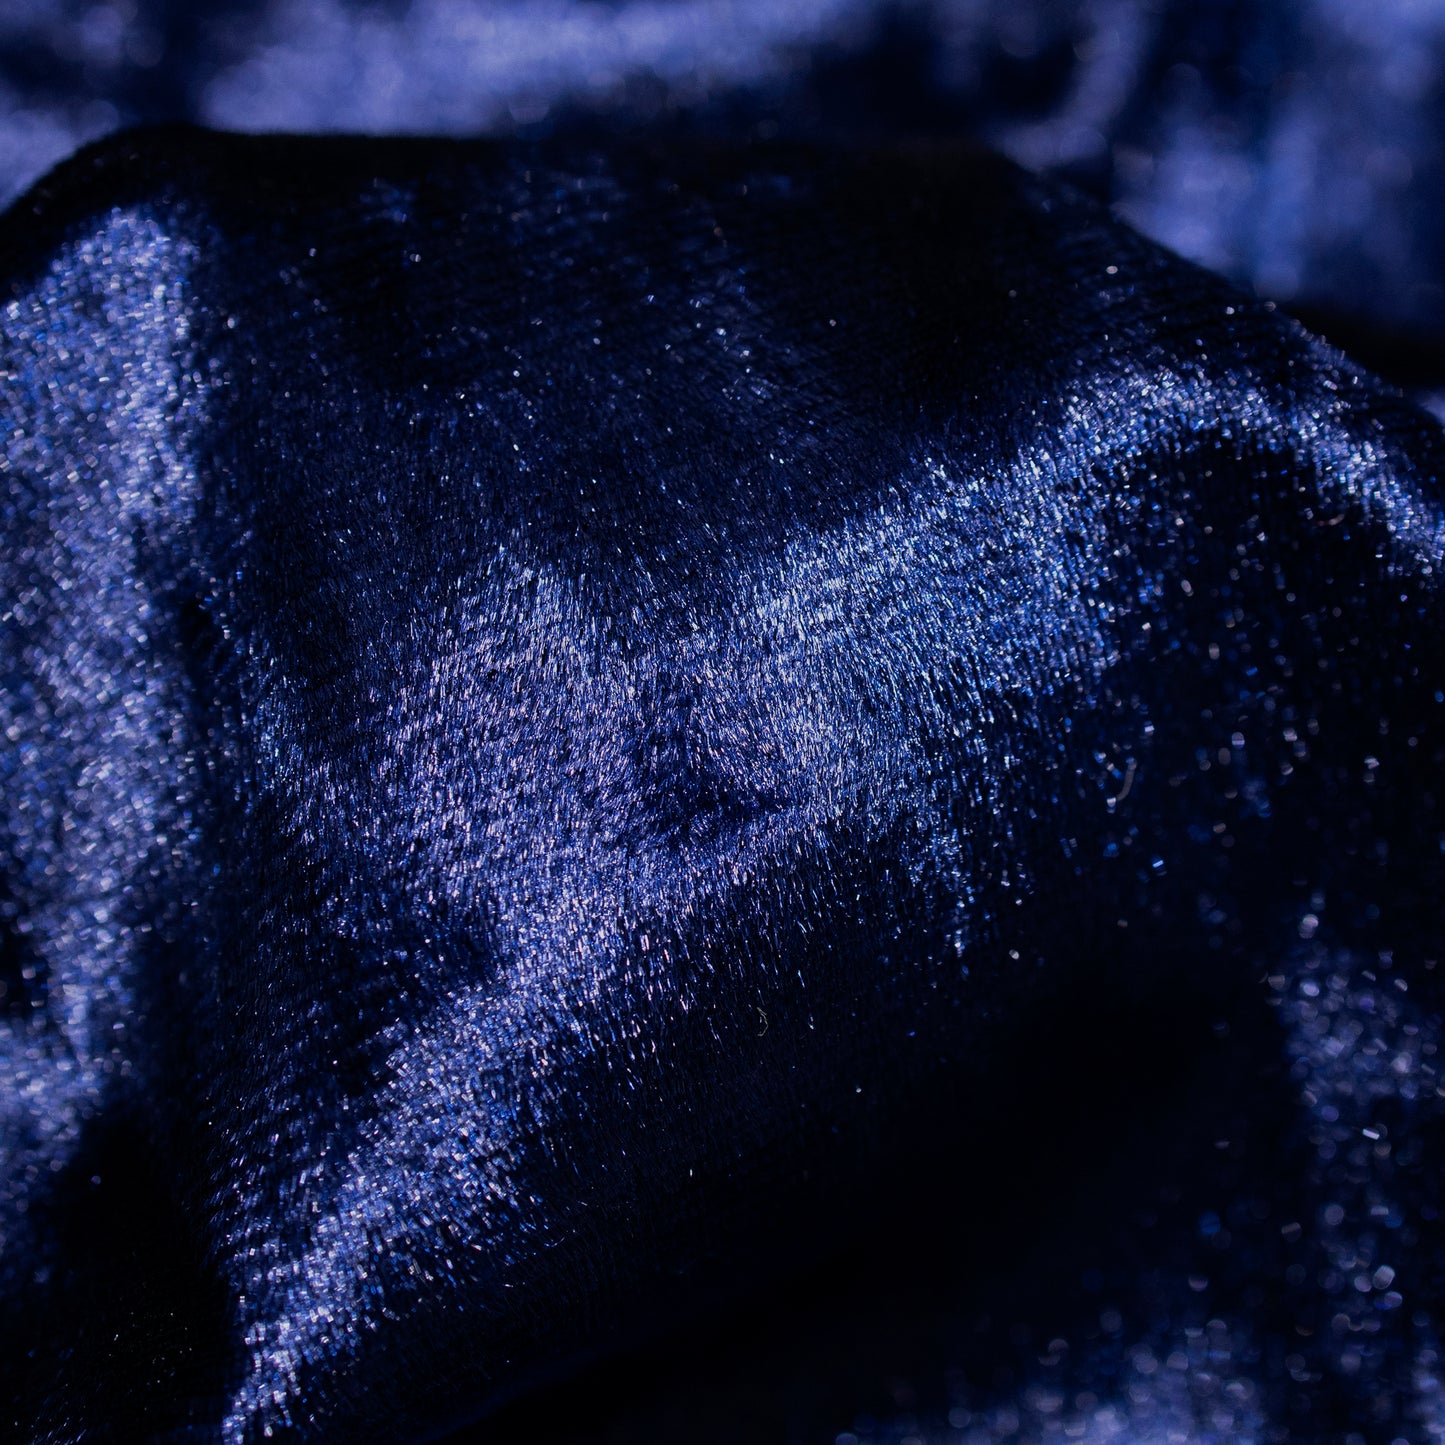 Luxurious Navy Blue Imported Stretched Velvet Fabric